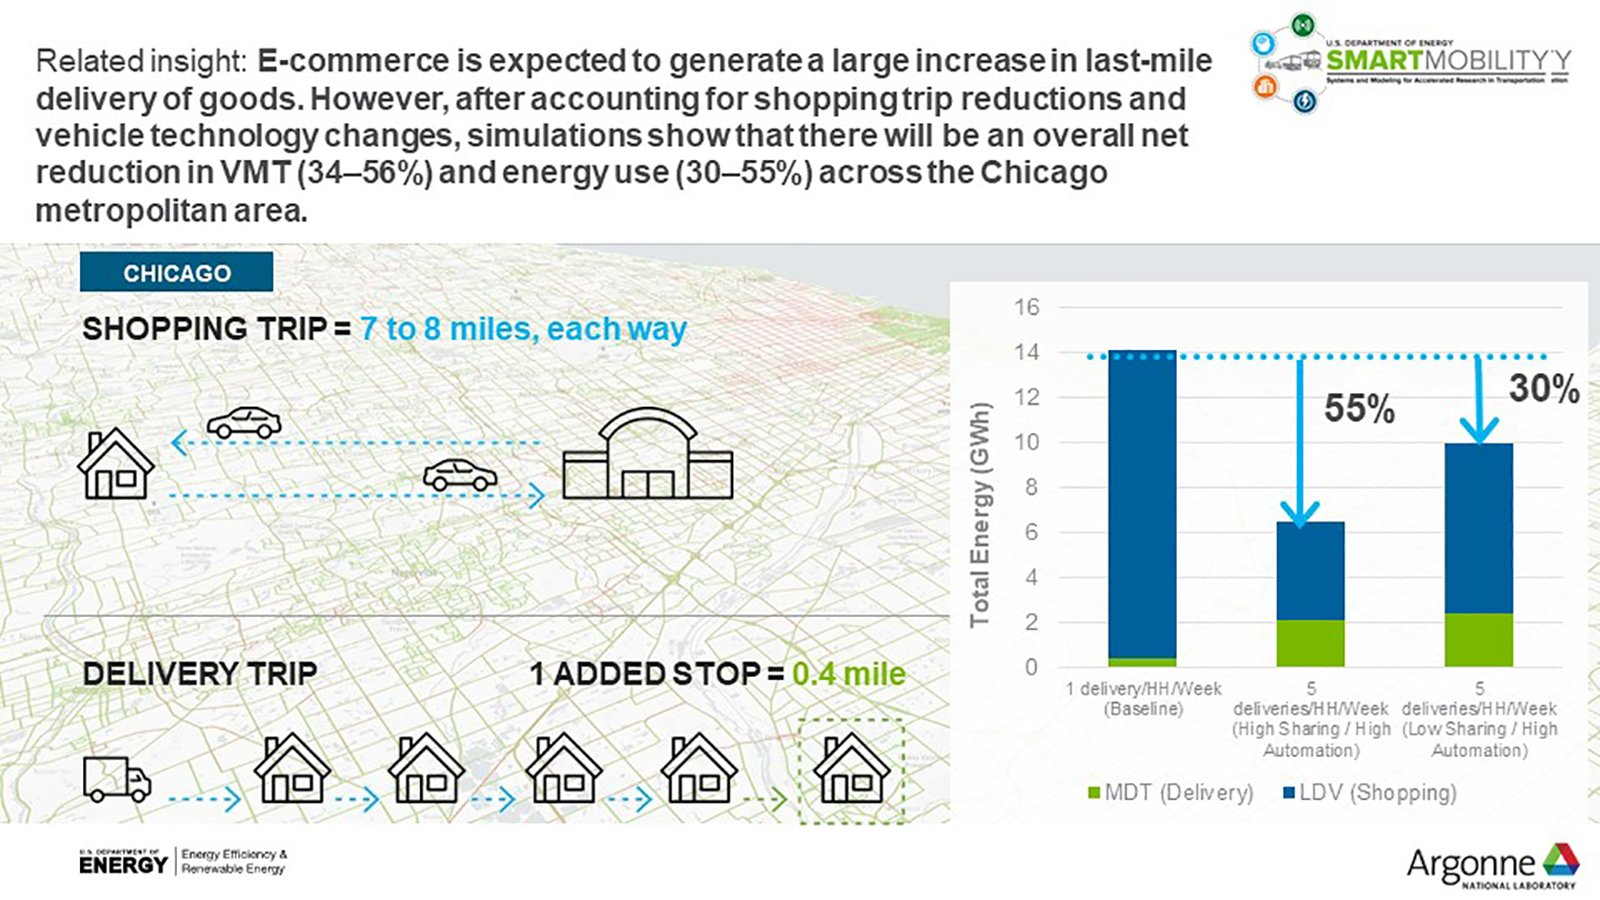 Intersections-System level energy impact of e-commerce